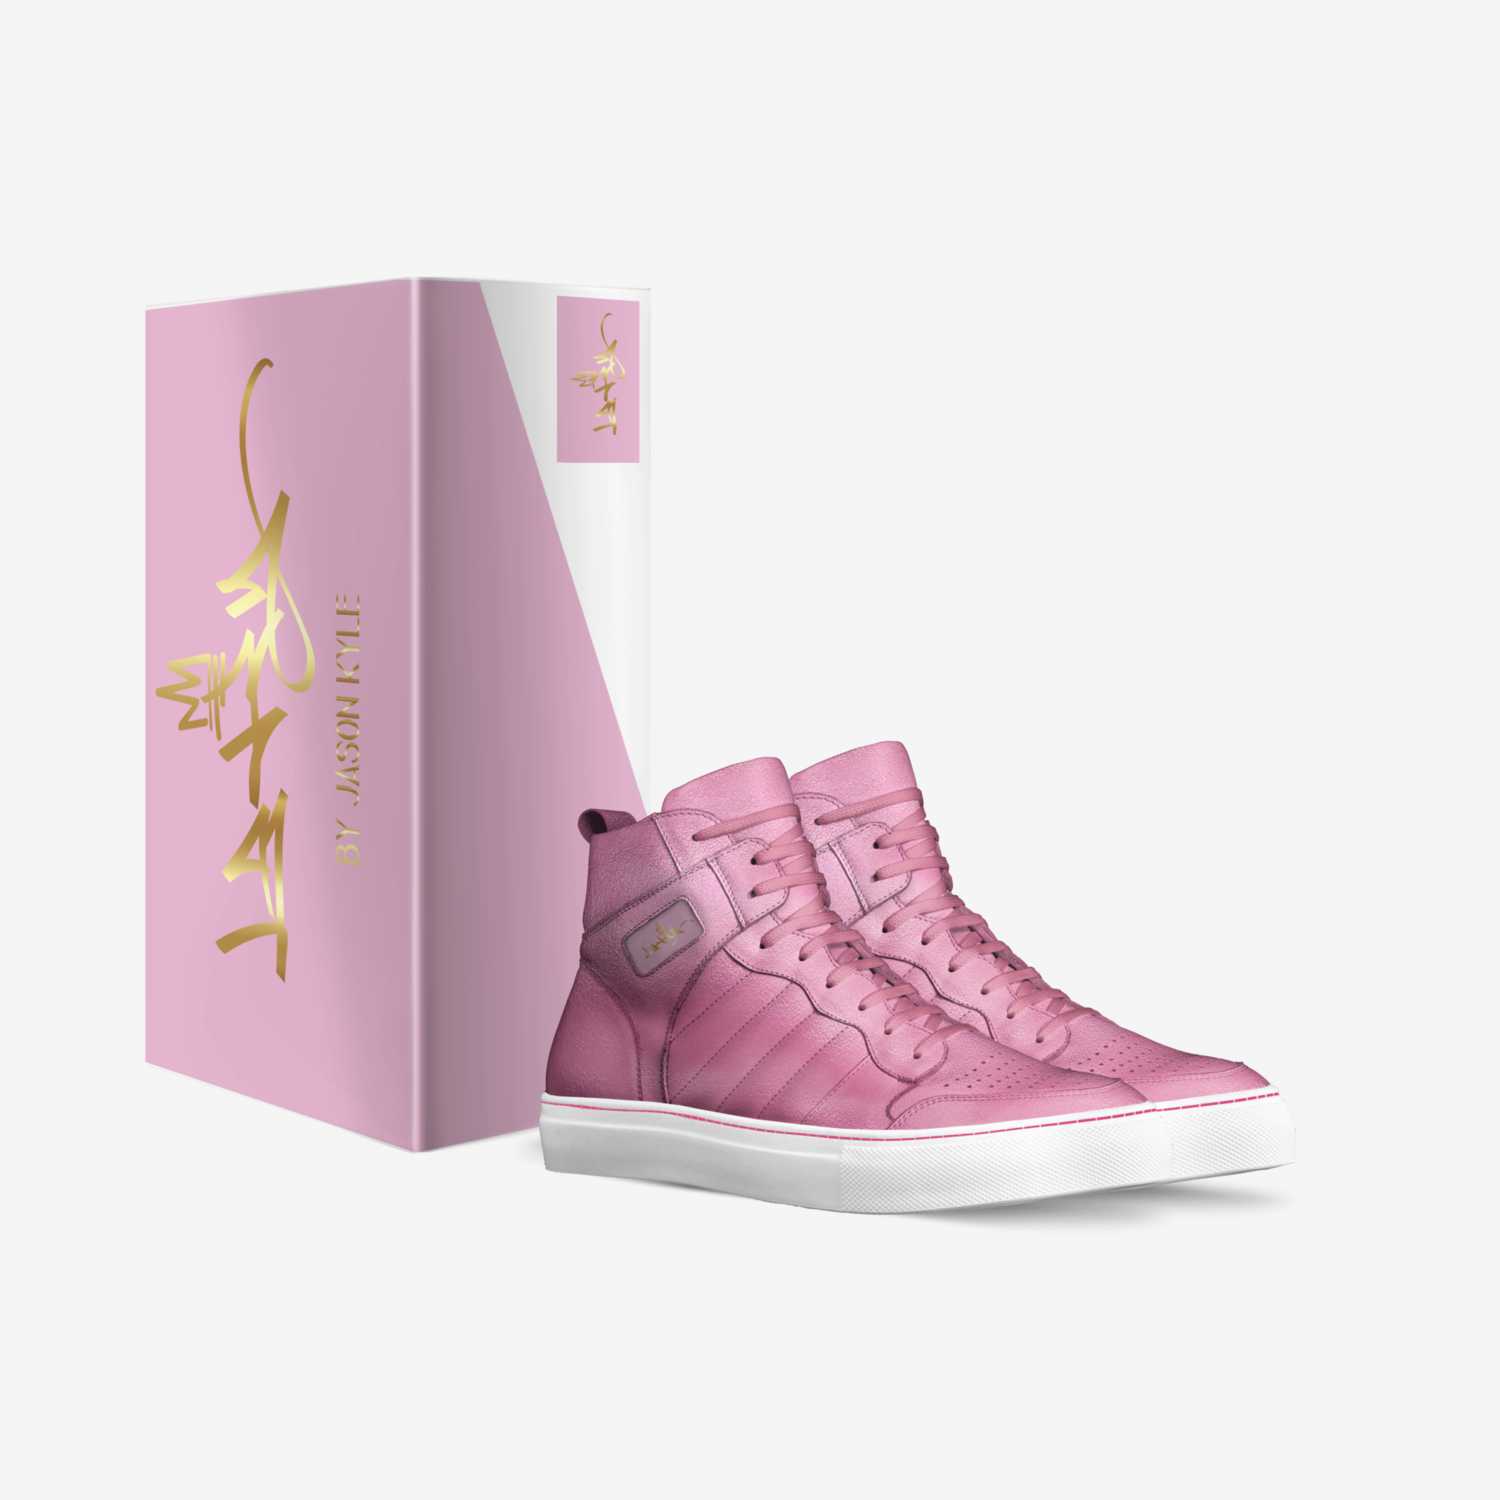 Laky PinkMix custom made in Italy shoes by Jason Kyle | Box view